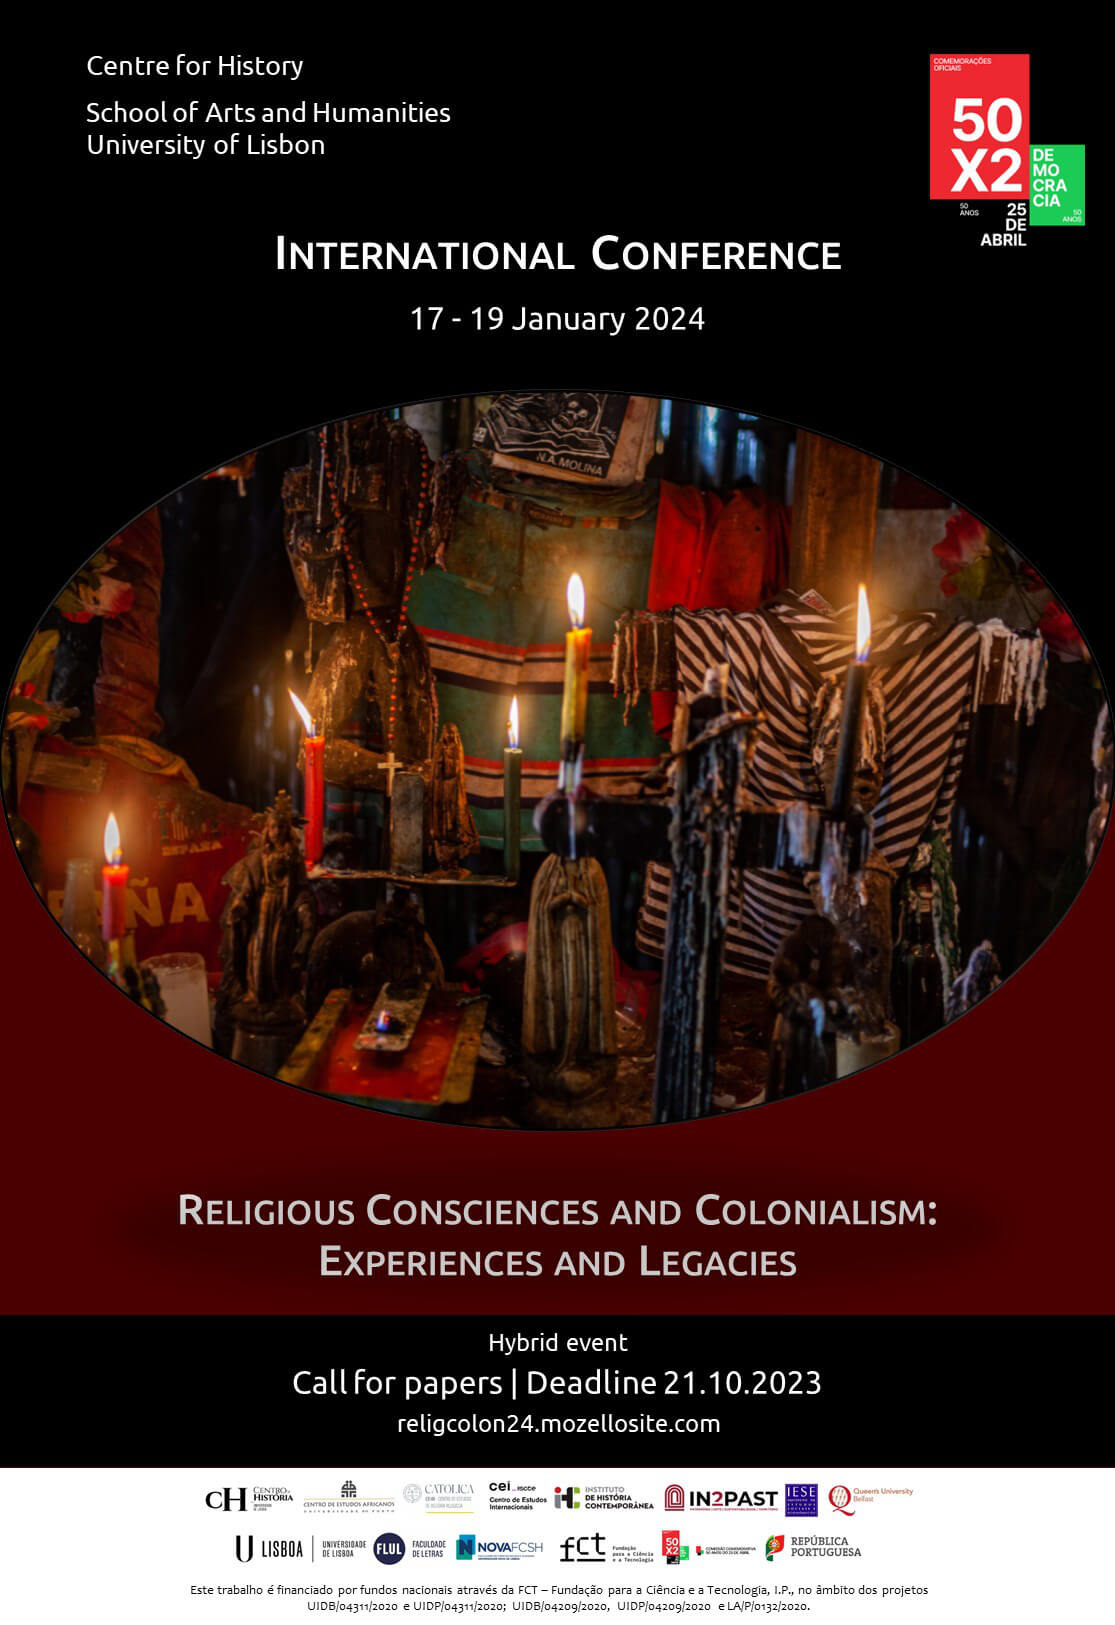 Poster for the call for papers of the international congress “Religious Consciences and Colonialism: Experiences and Legacies”, organised under the framework of the commemorations of the 50th anniversary of Carnation Revolution. It will take place at the Faculty of Humanities of the University of Lisbon between 17 and 19 January 2024. The deadline for proposal submission is 21 October 2023. The poster includes an uncredited photograph by José Chambel of a “pagan altar” in São Tomé and Príncipe.